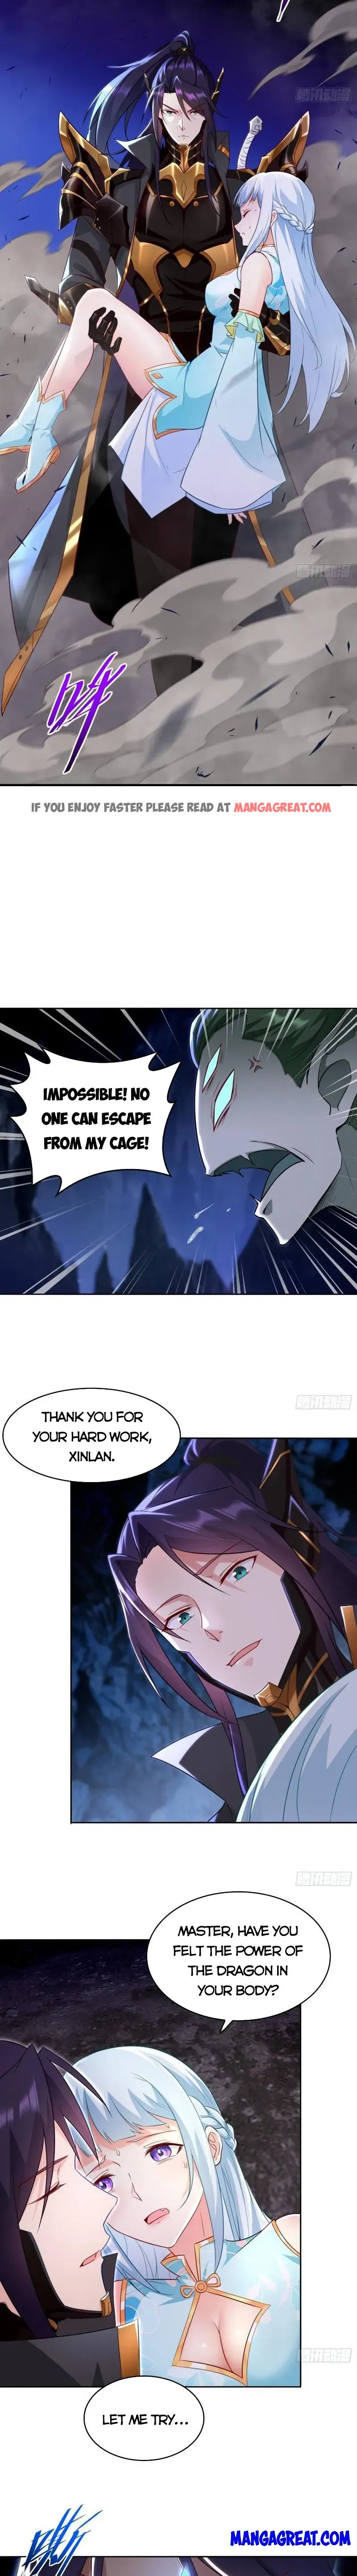 Forced to Become the Villain's Son-in-law Chapter 398 page 6